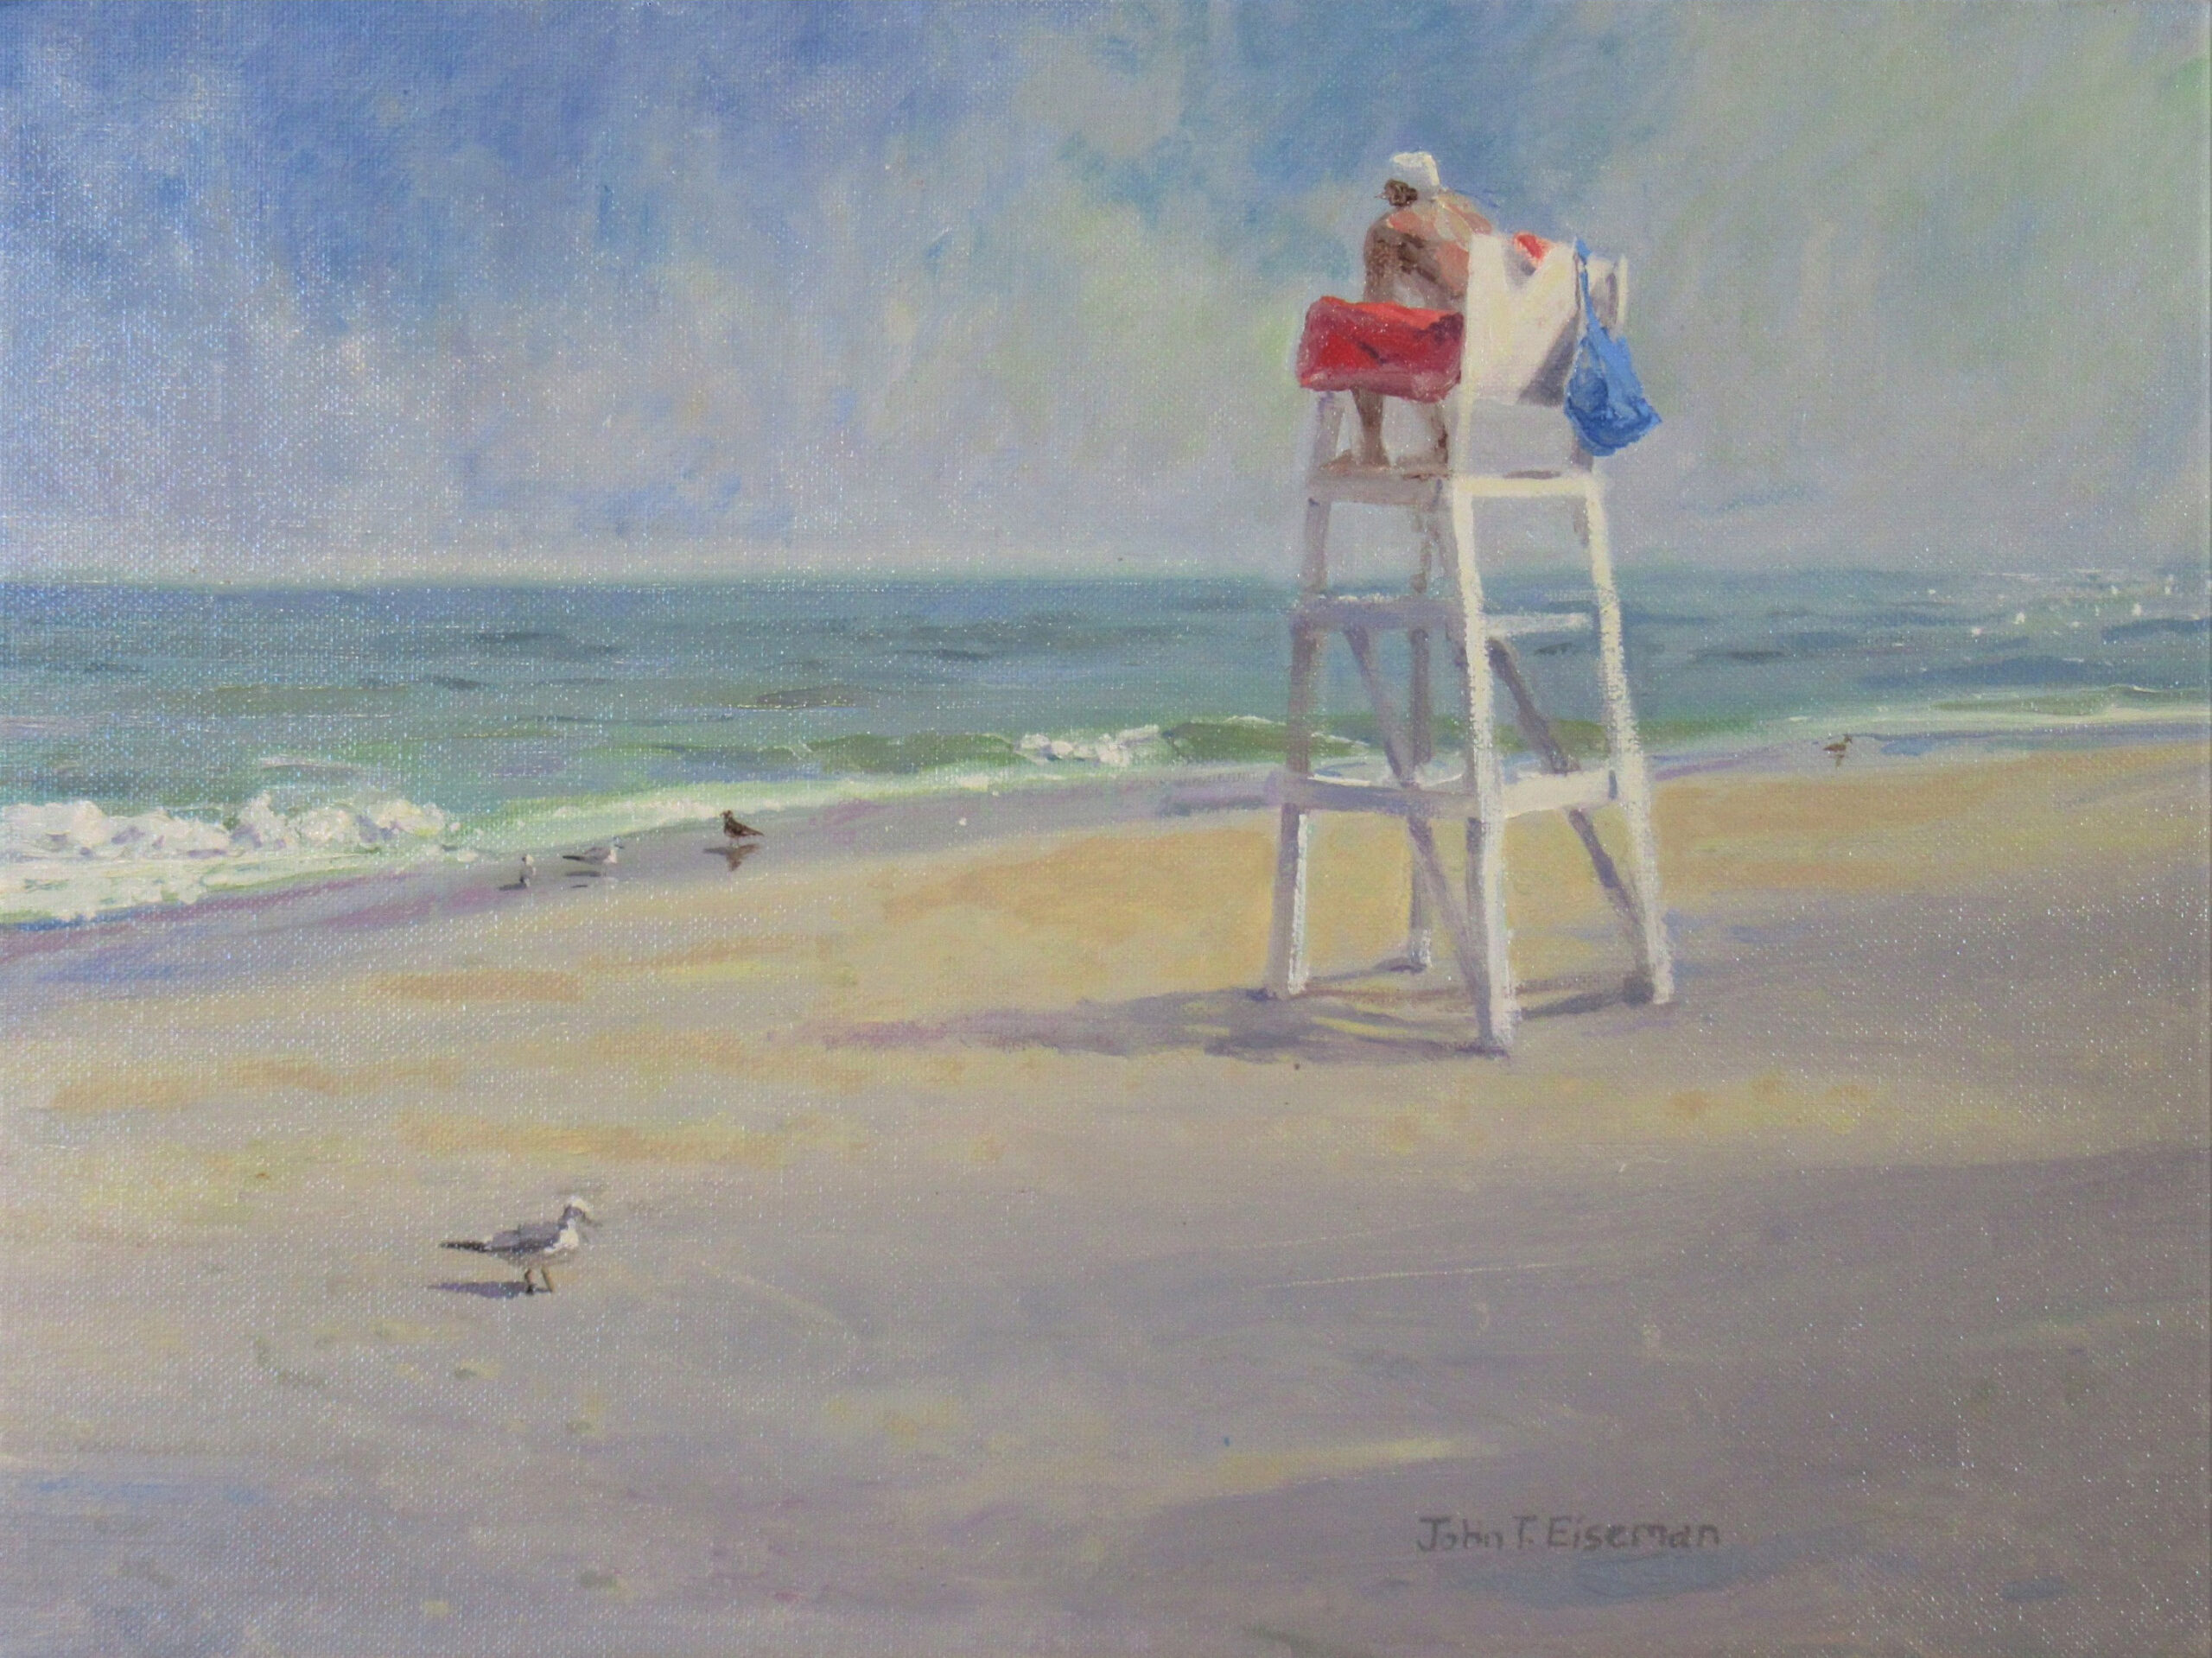 “5 O’ Clock” by John T Eiseman, 2022, oil, 12 x 16 in., Available from artist, Plein air and studio